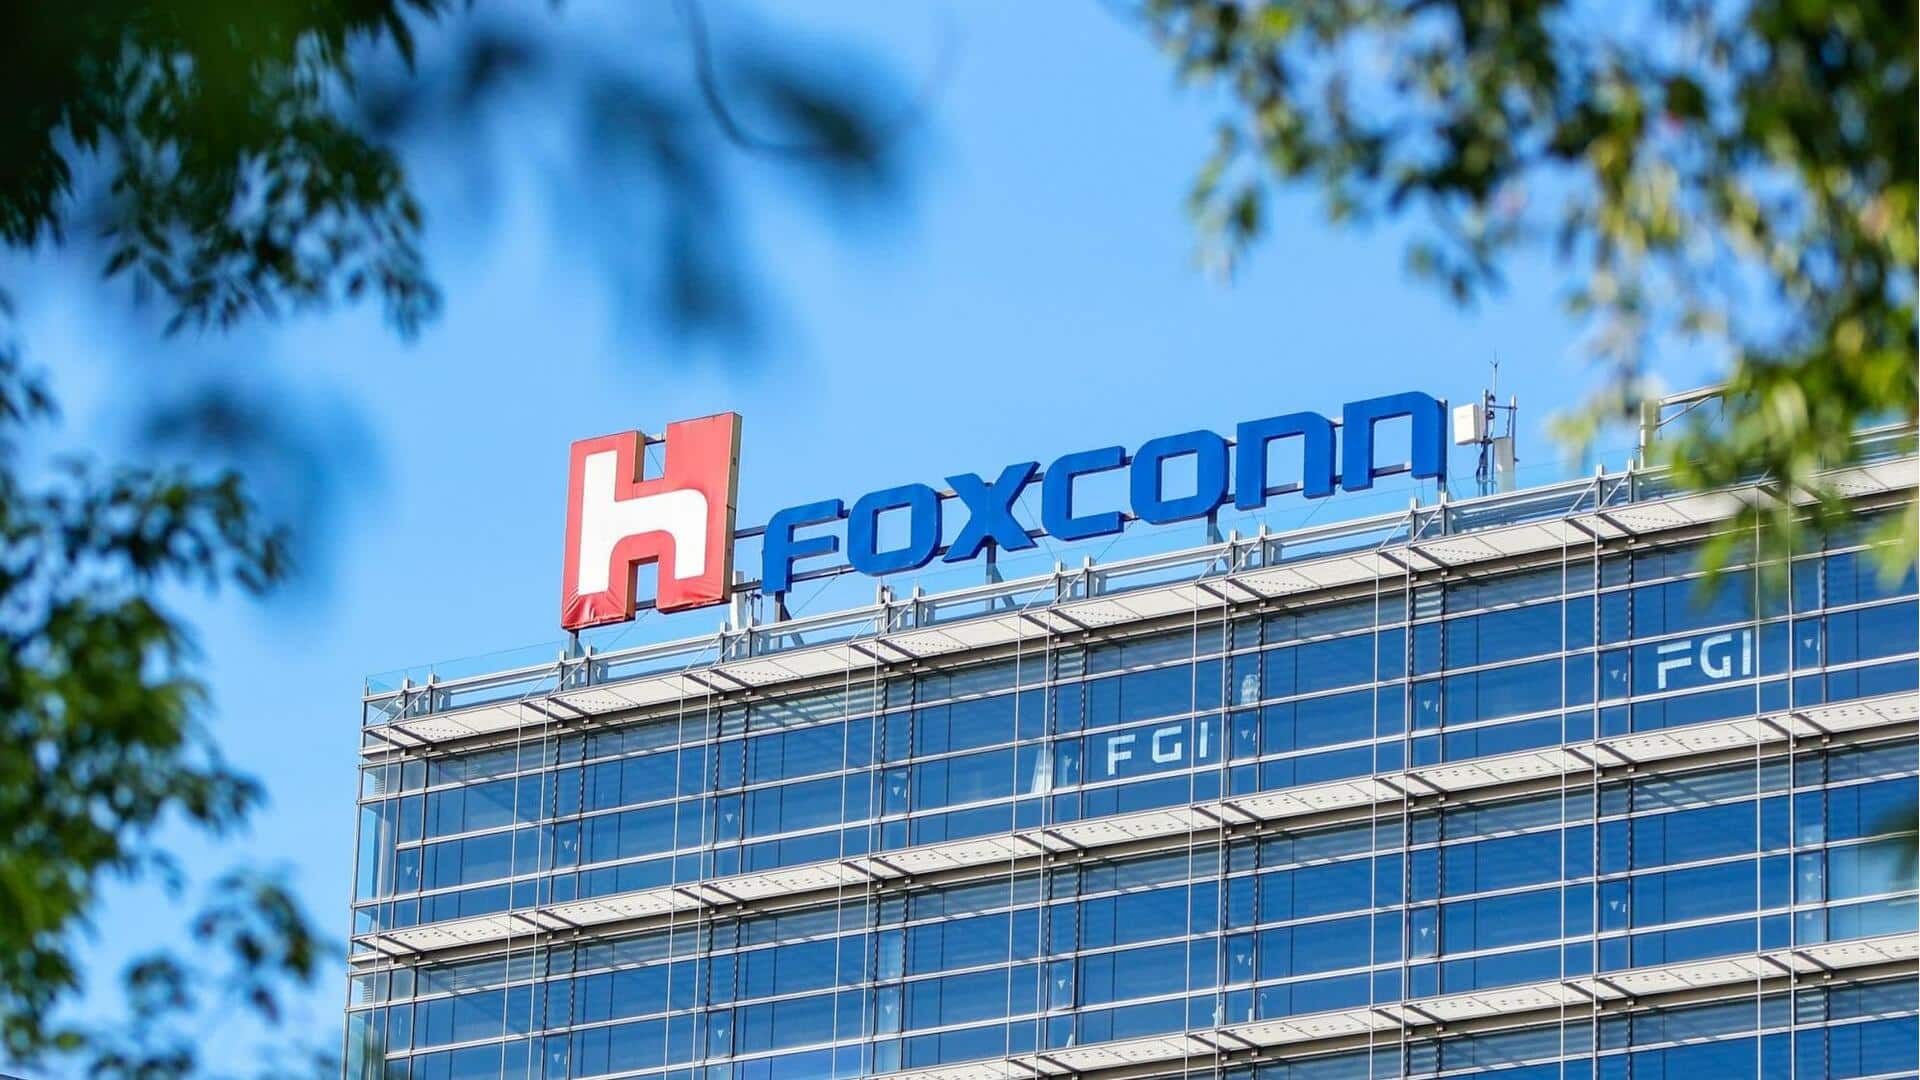 iPhone-maker Foxconn launches satellites on SpaceX rocket: What it means